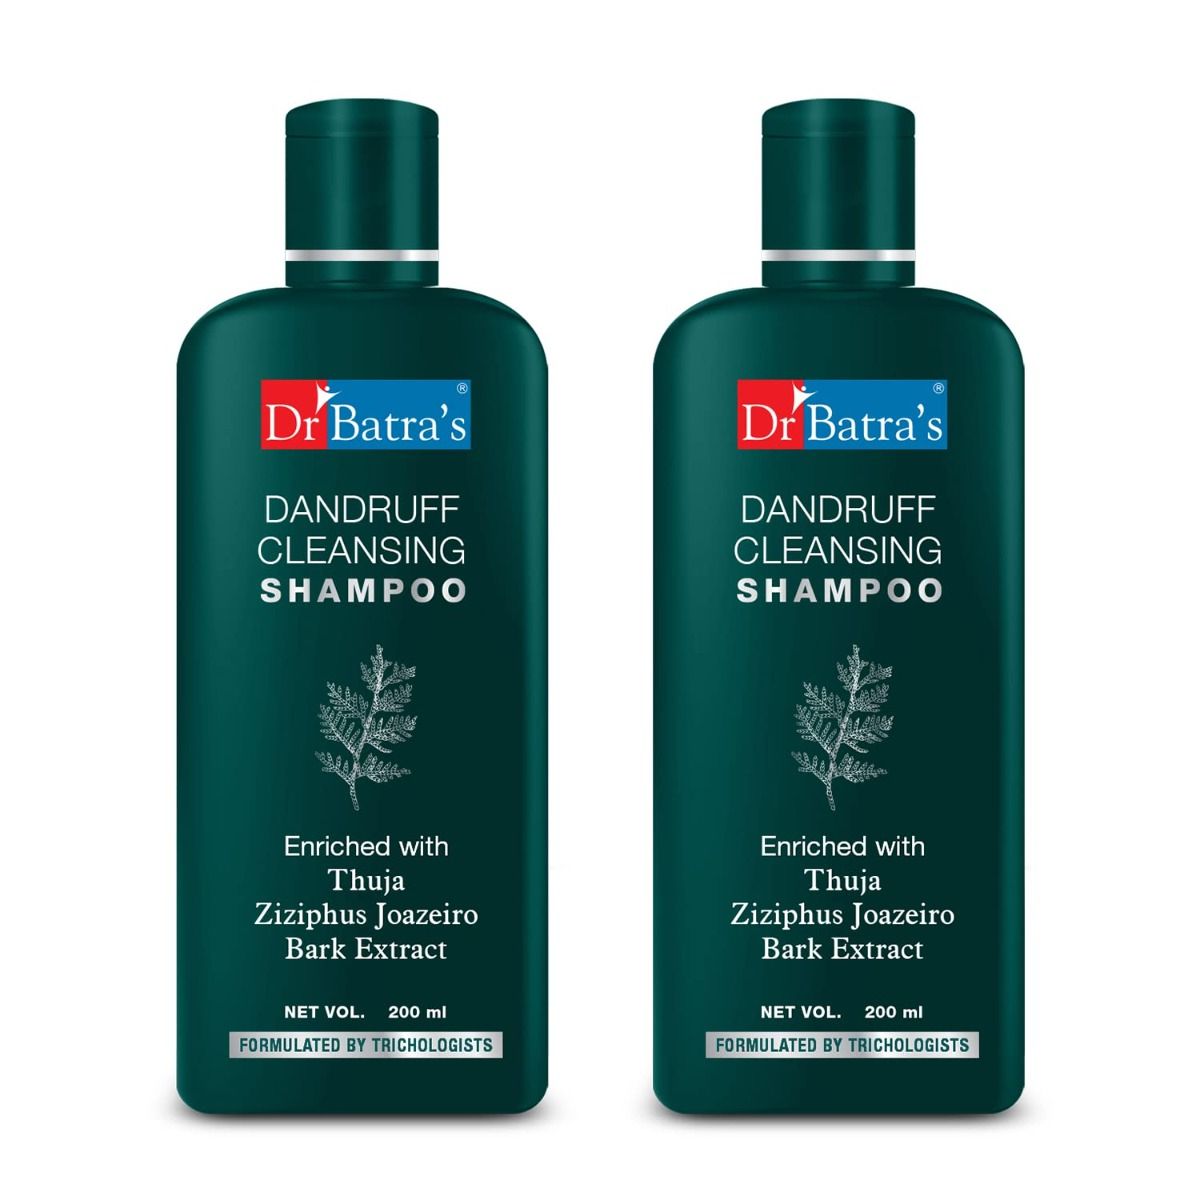 Dr Batras Anti-Dandruff Shampoo Enriched with Natural extract Of Thuja Paraben Free - 200 ml (Pack of 2)